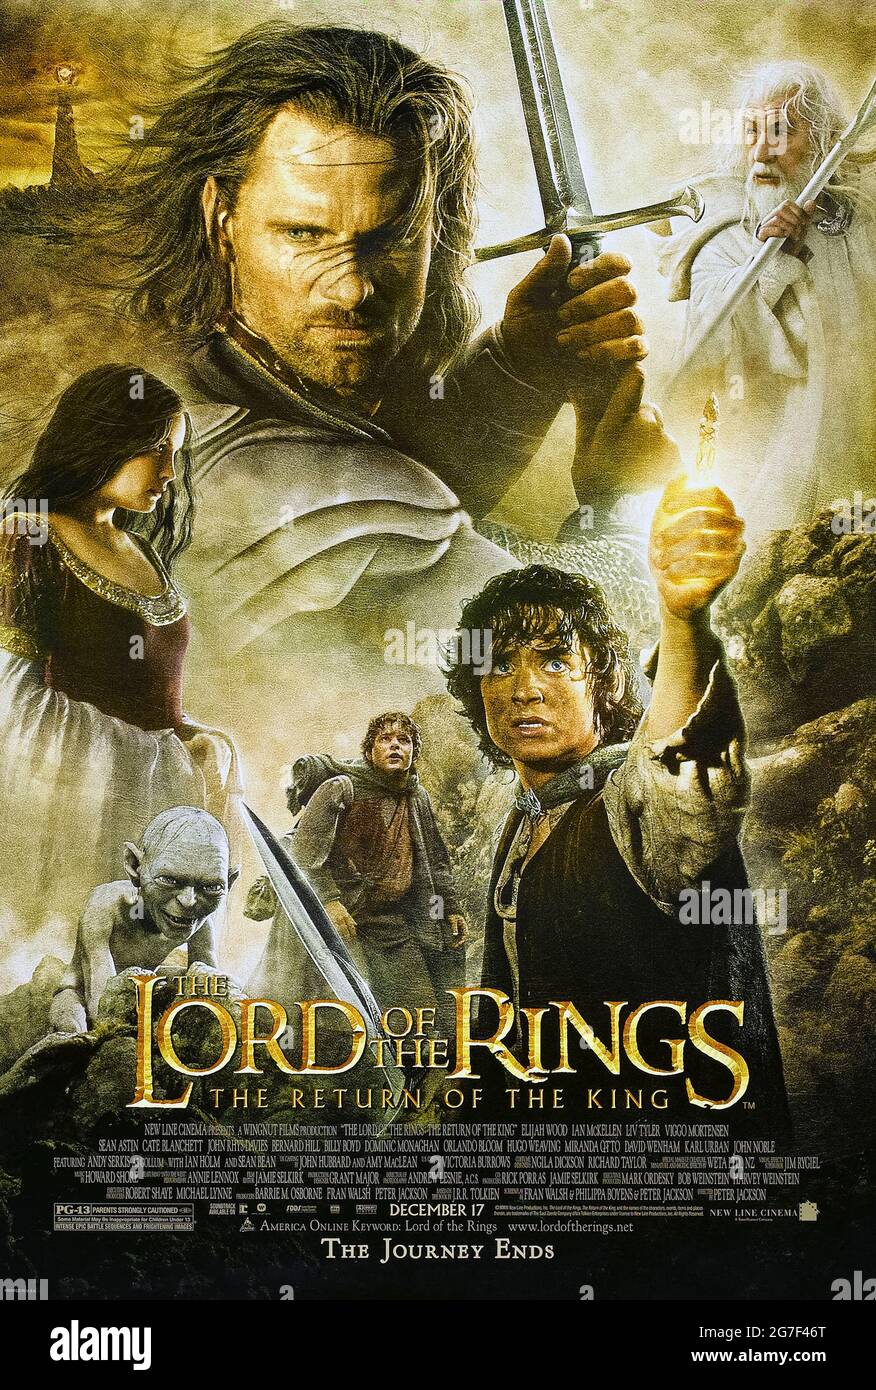 The Lord of the Rings: The Return of the King (2003) directed by Peter Jackson and starring Elijah Wood, Ian McKellen, Orlando Bloom and Viggo Mortensen. Epic conclusion to the trilogy based on J.R.R. Tolkien novels finds the hobbits approaching Mount Doom as Sauron's army bears down on Gandalf and Aragorn. Photograph of an original 2003 US one sheet poster ***EDITORIAL USE ONLY***. Credit: BFA / New Line Cinema Stock Photo